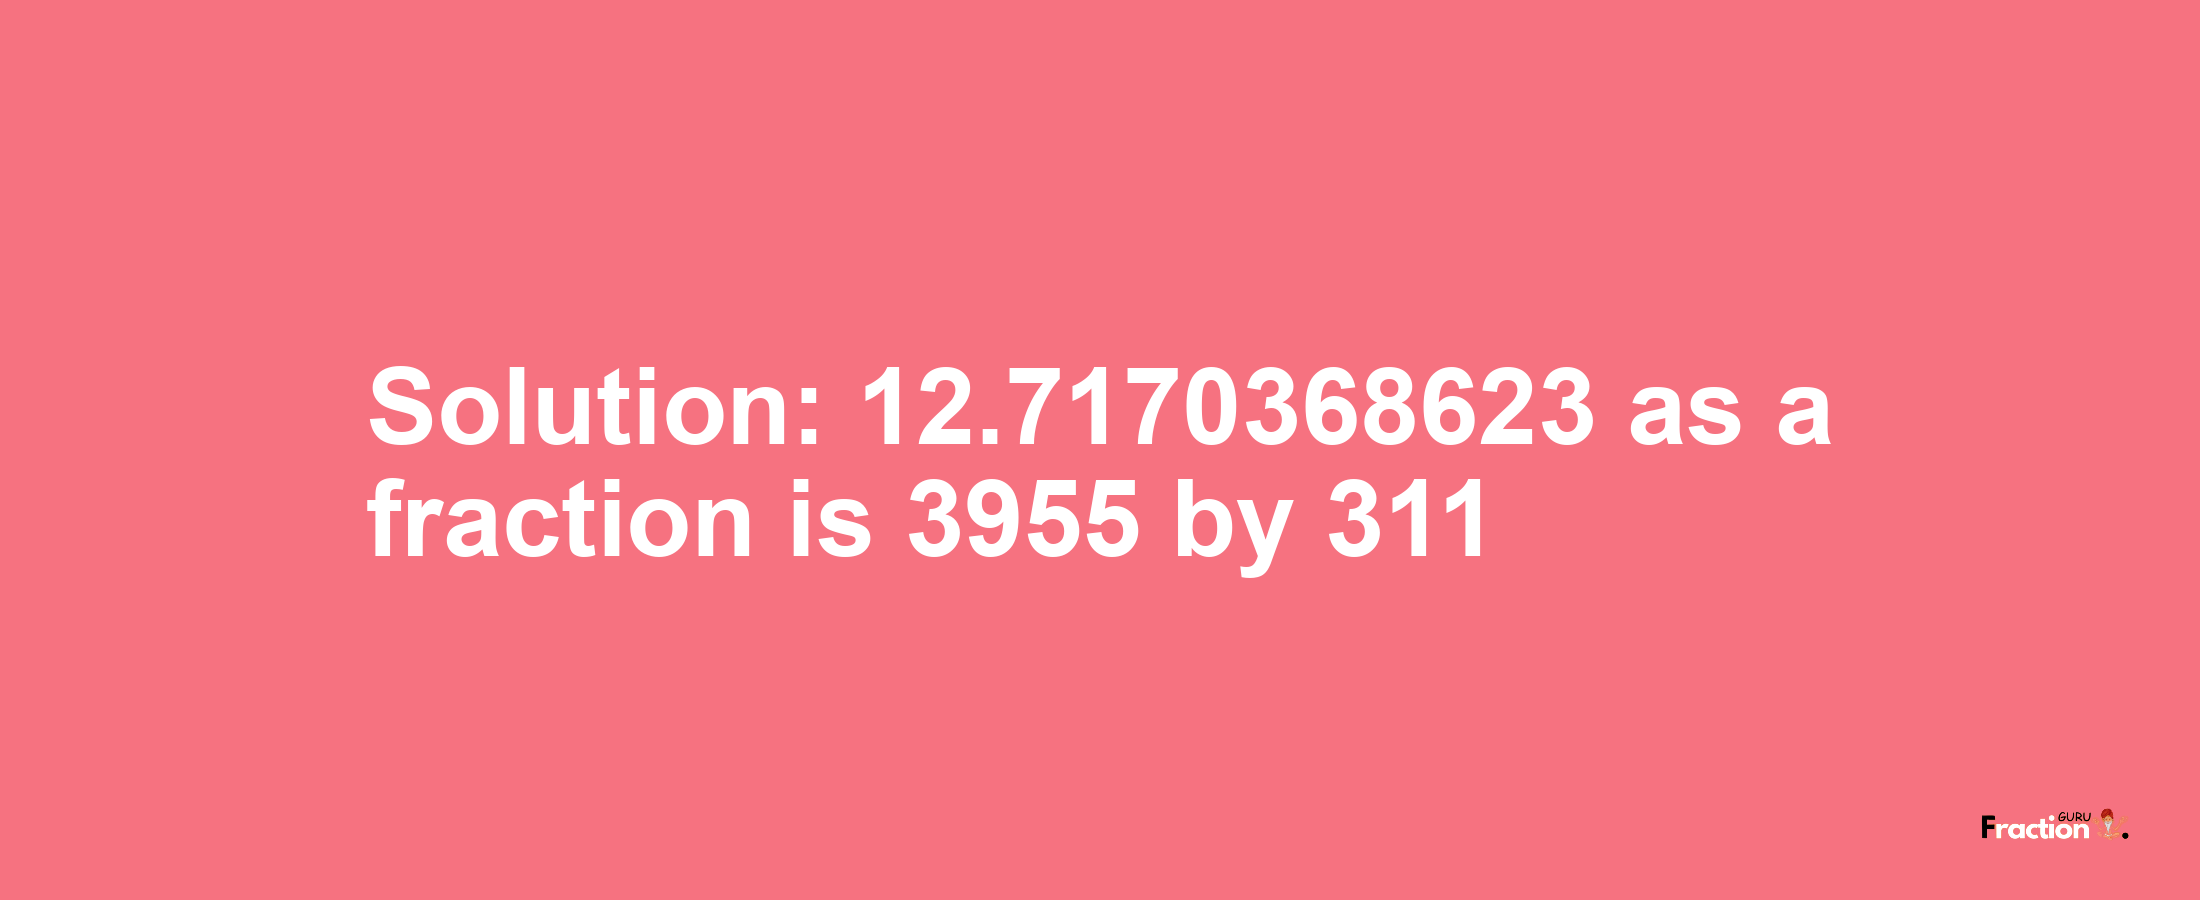 Solution:12.7170368623 as a fraction is 3955/311